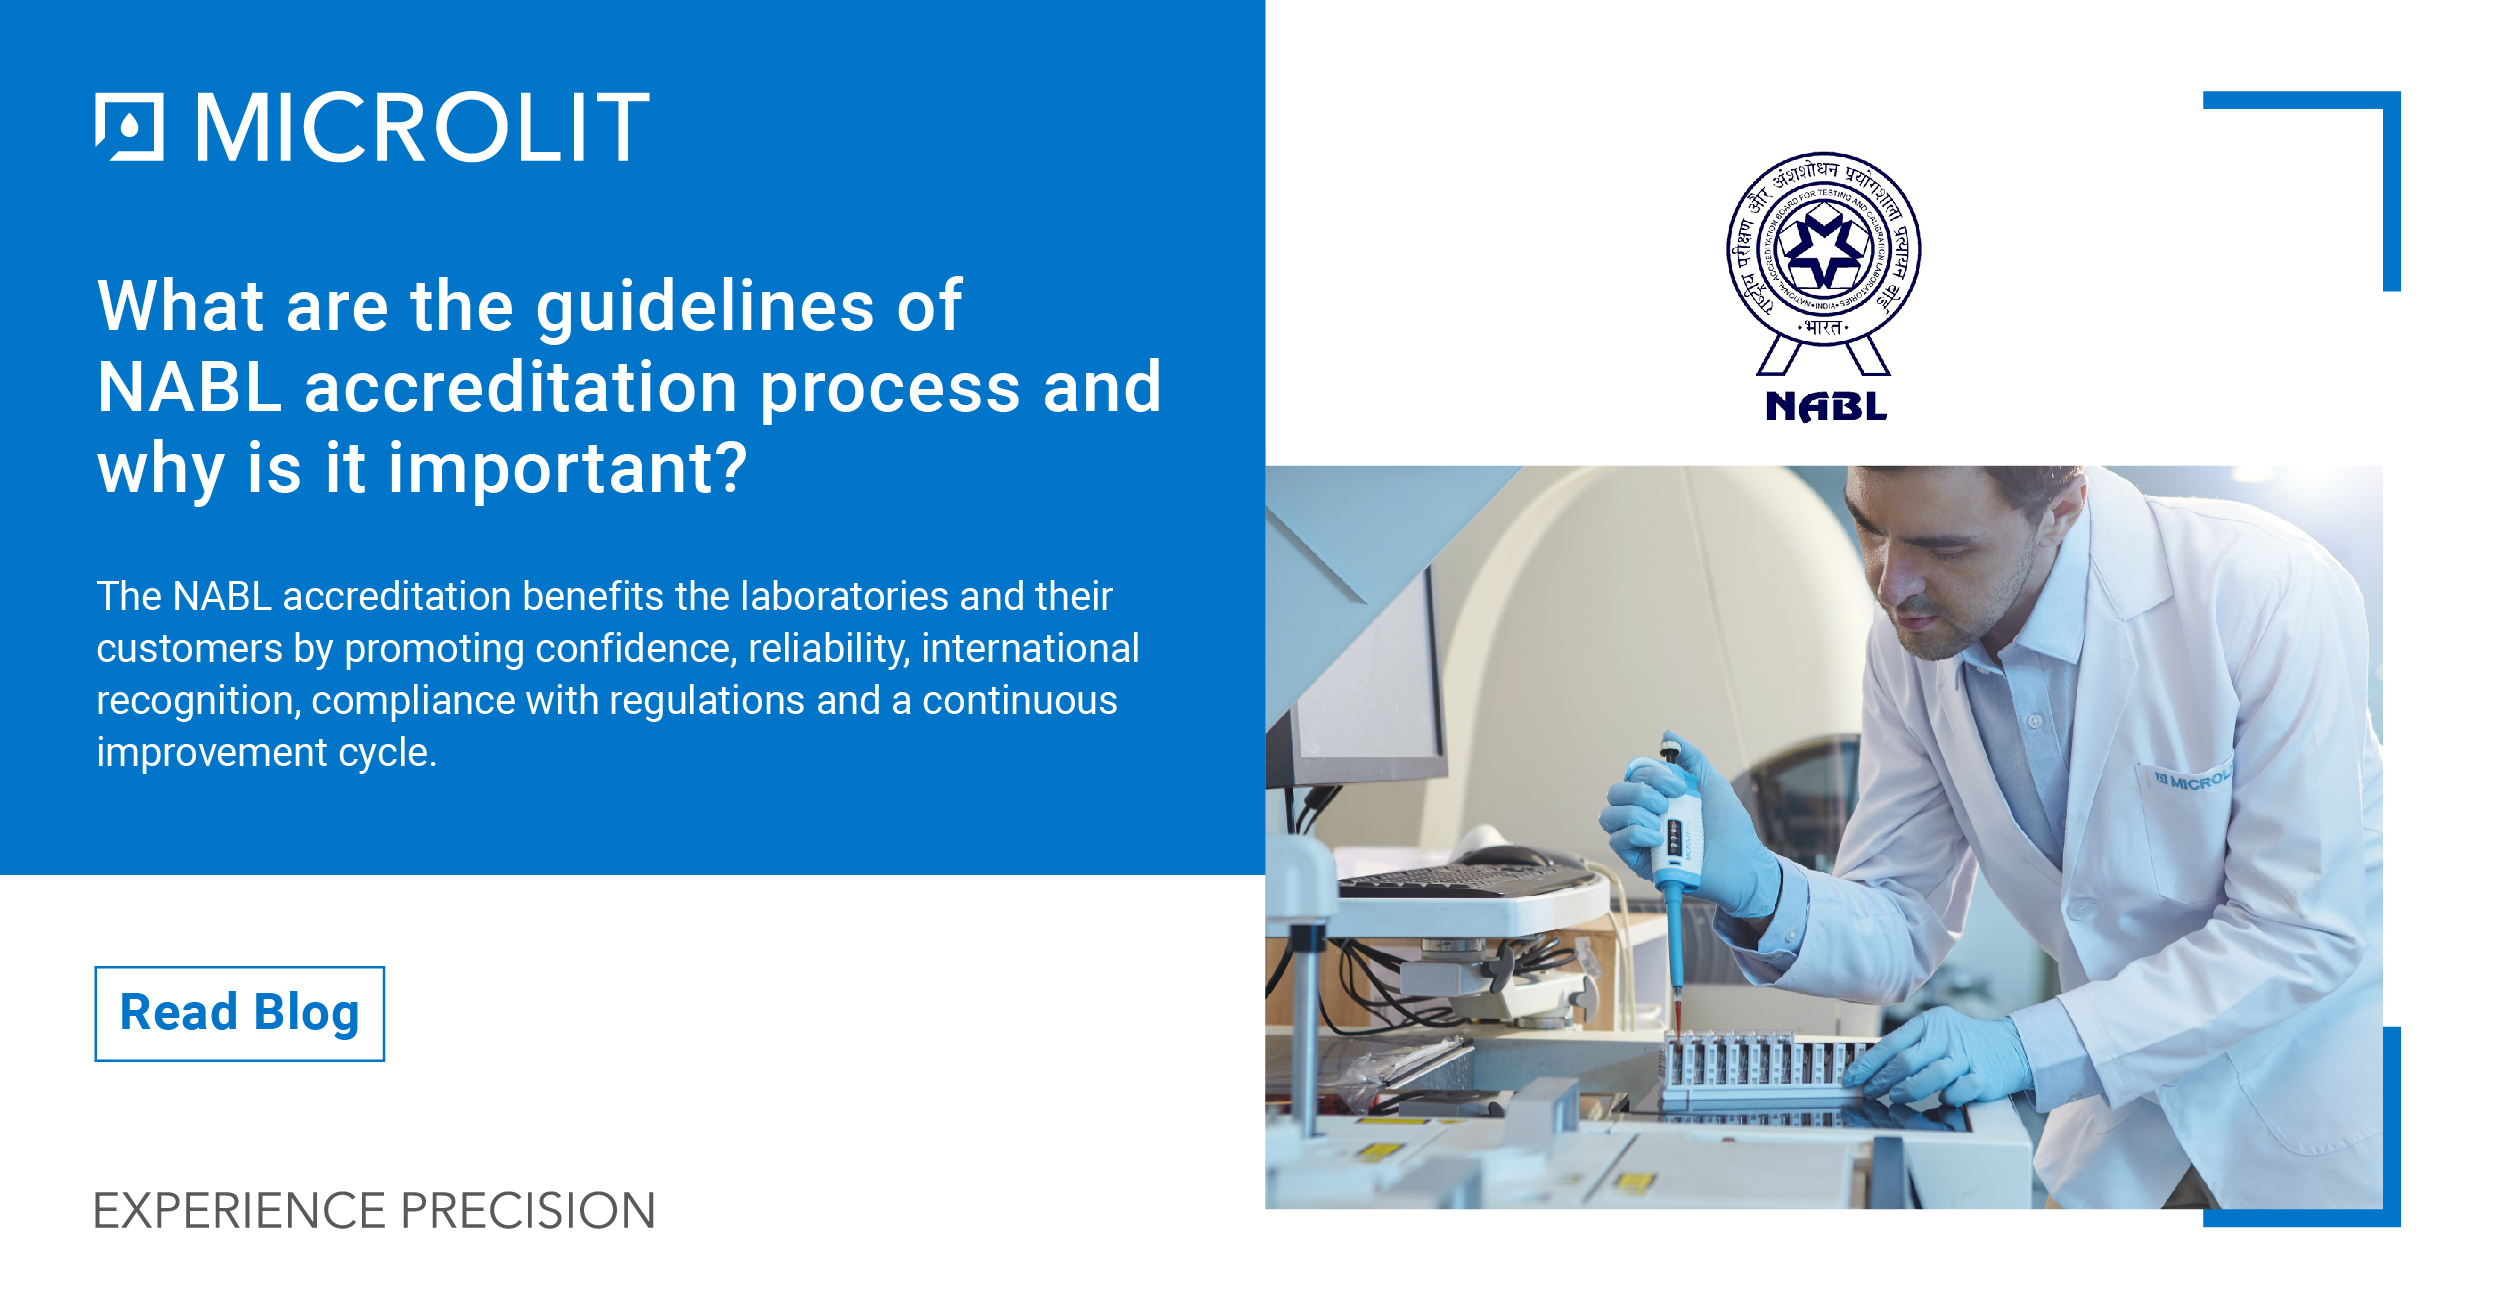 What are the guidelines of NABL accreditation process and why is it important?